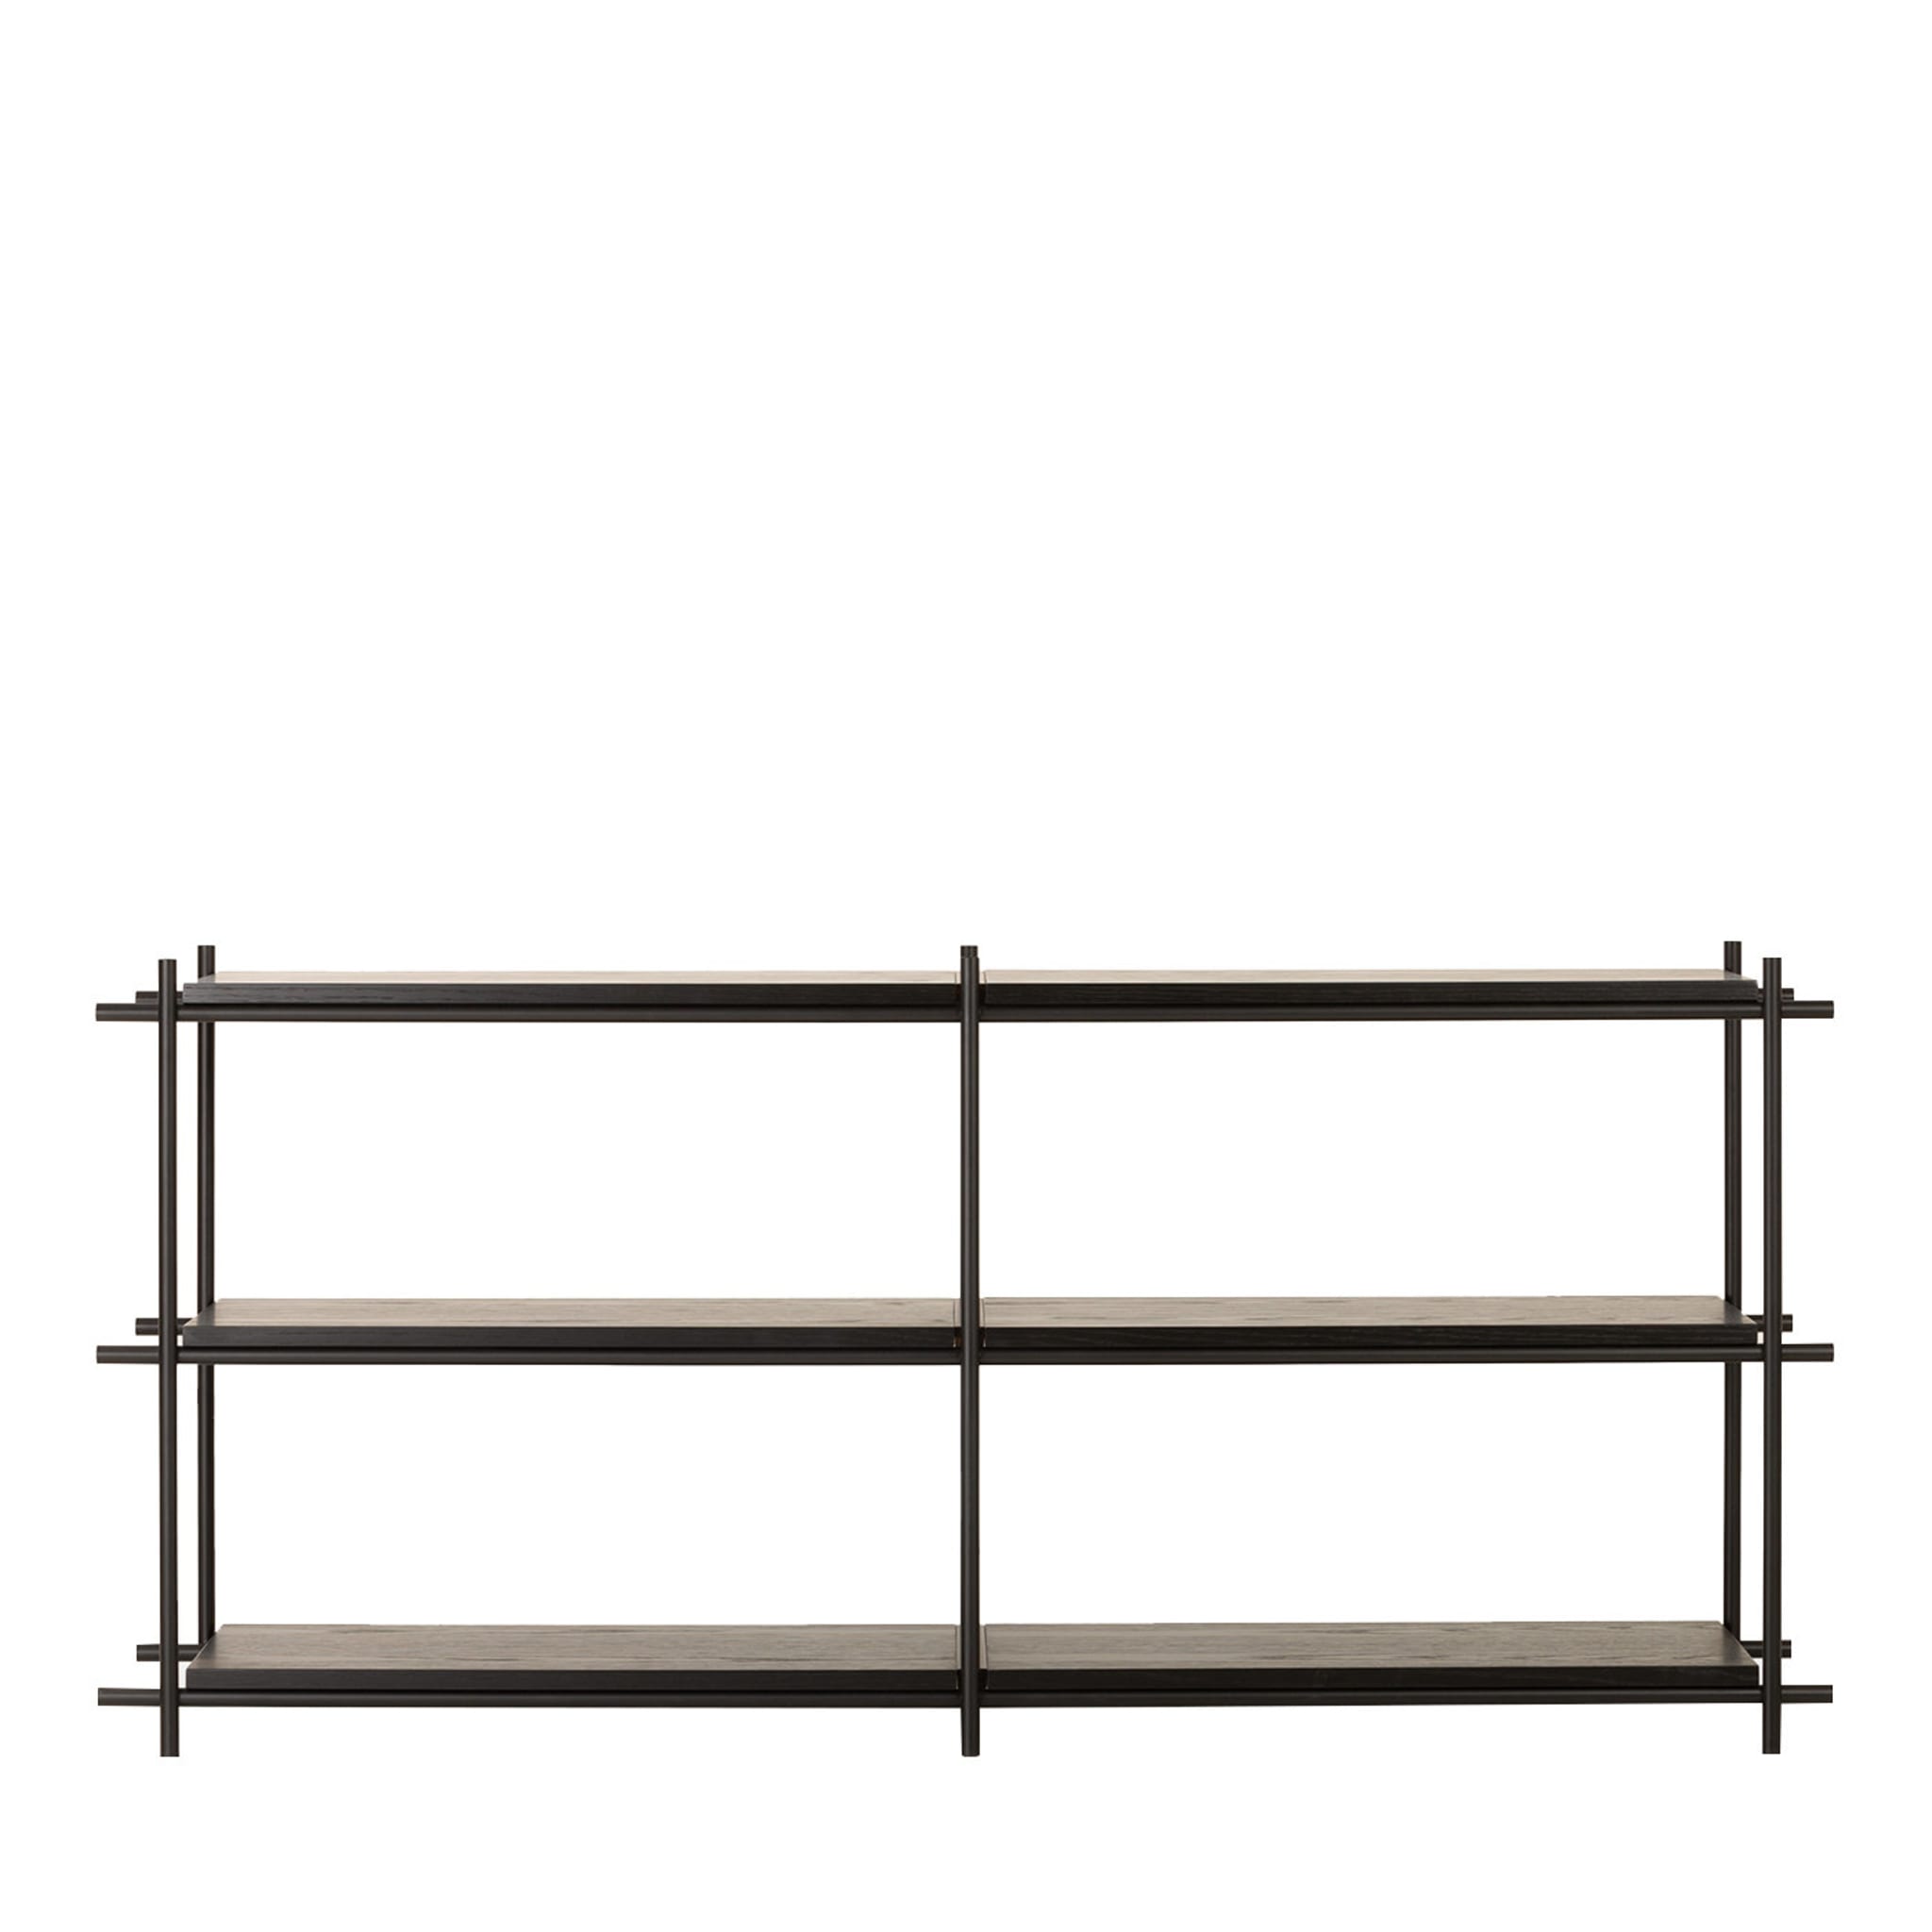 Innocent 4-Unit Bookcase by Gio Tirotto - Main view